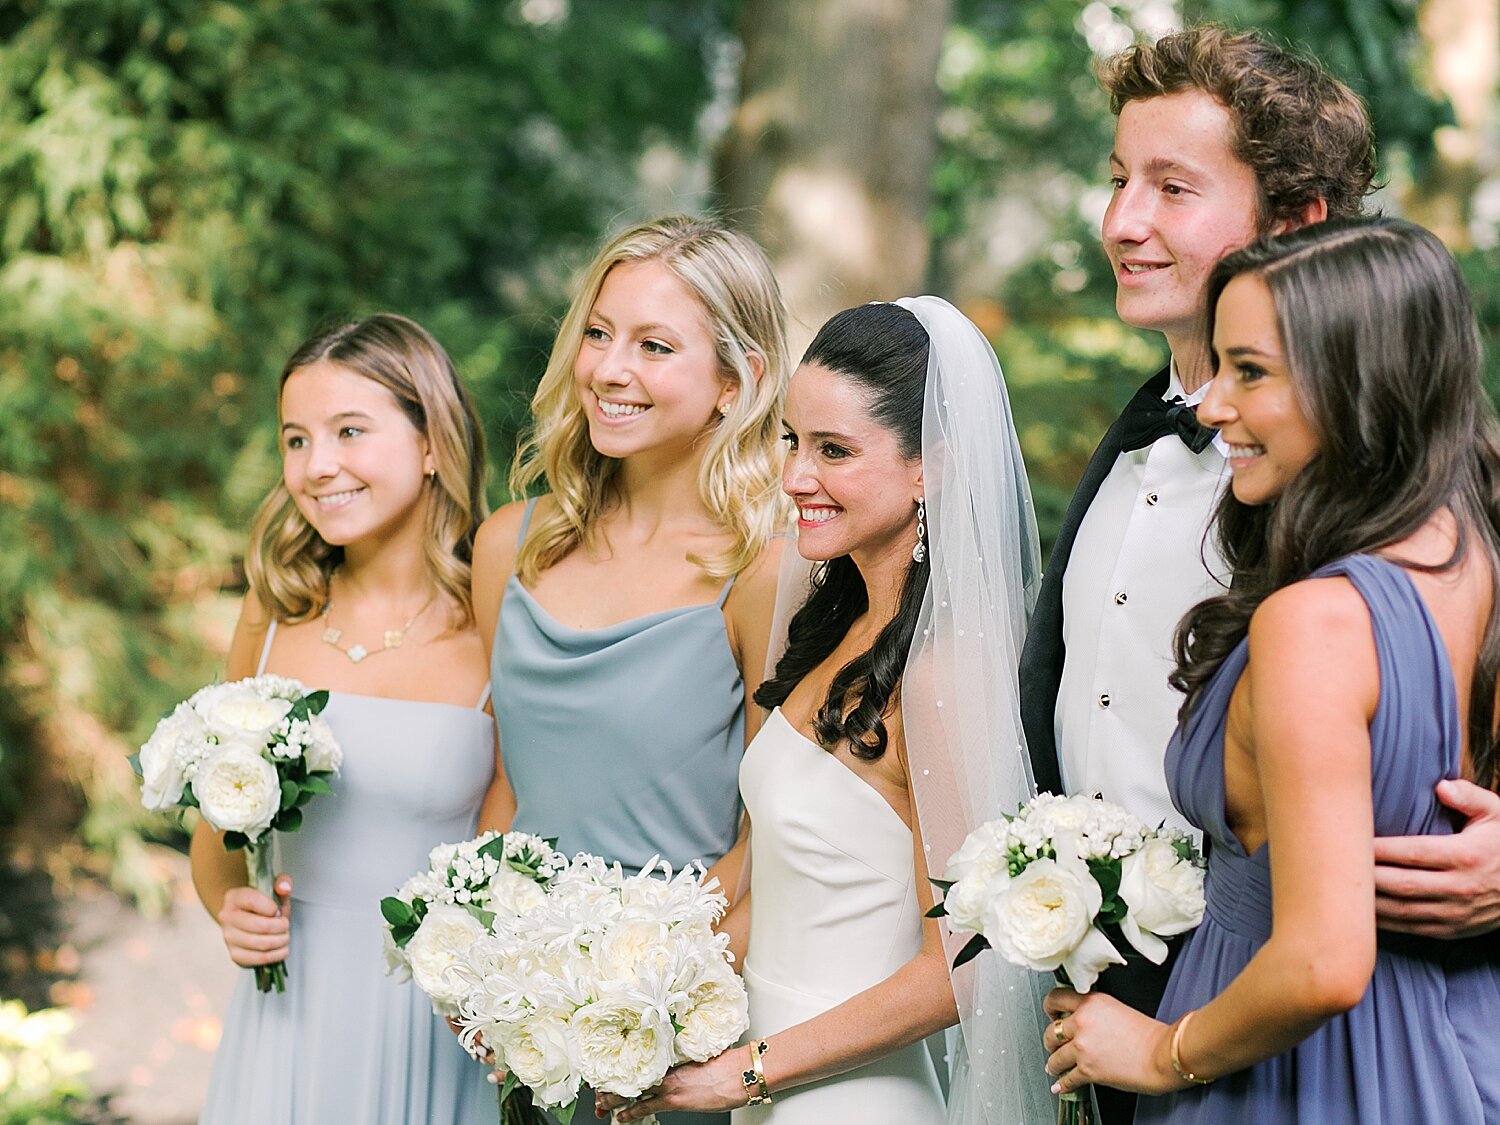 bride poses with bridesmaids on wedding morning | Stylish Private Home Wedding Inspiration | Asher Gardner Photography